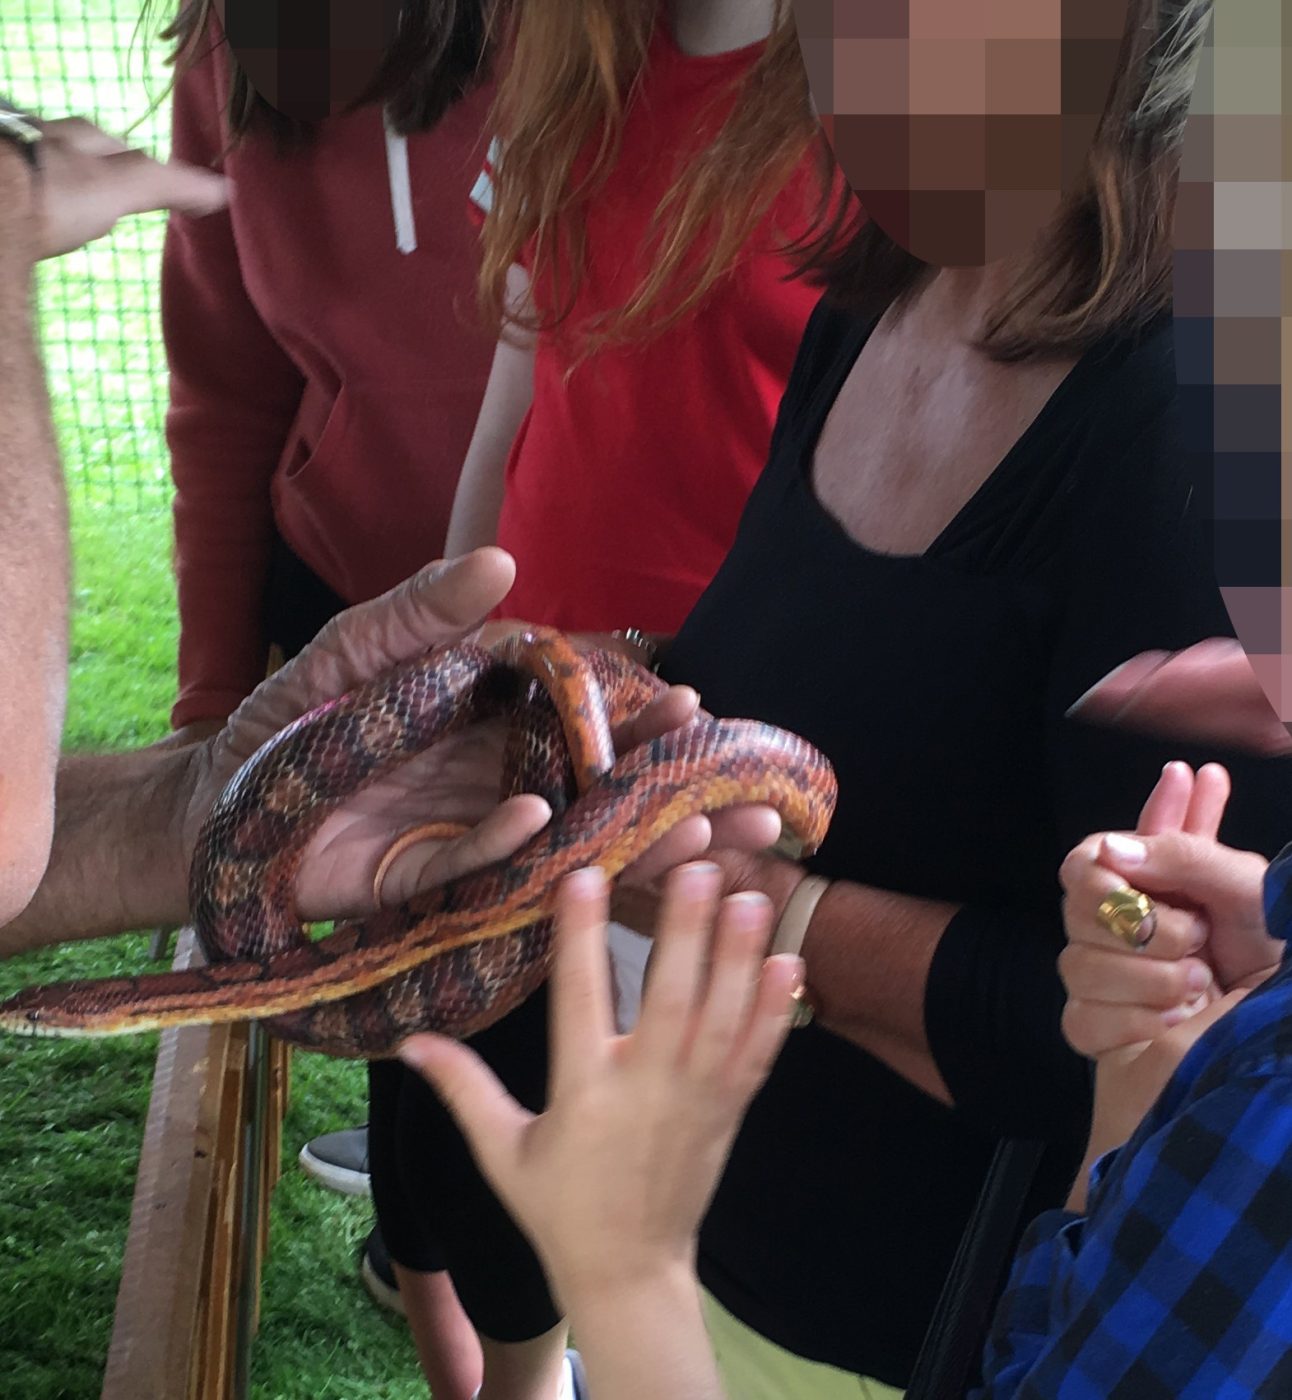 AA young boy is handling a snake while adults look on